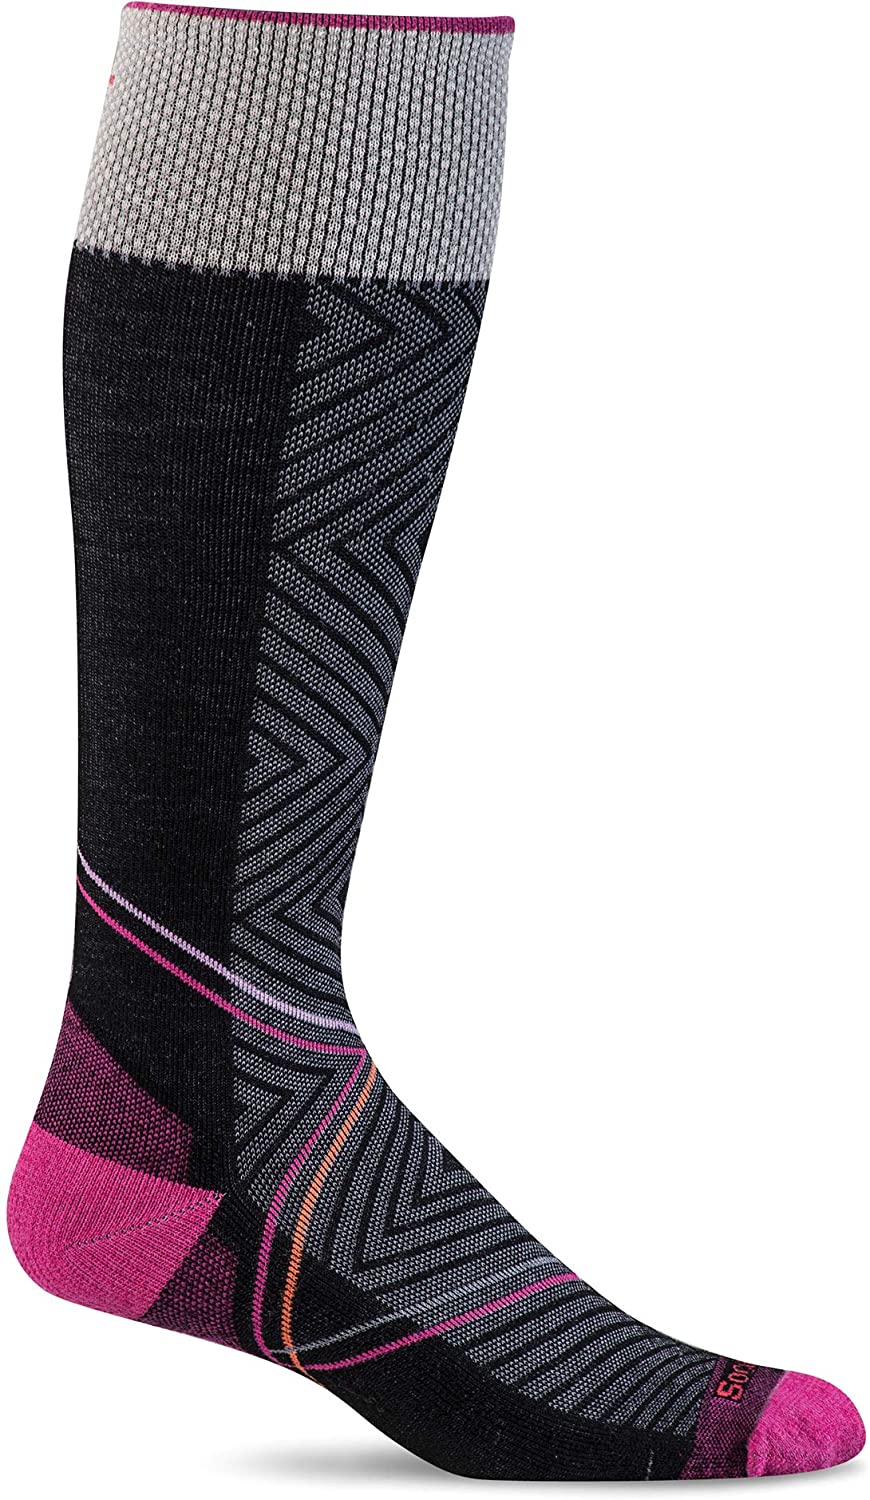 Sockwell Women's Pulse Graduated Compression Sock in Black from the side